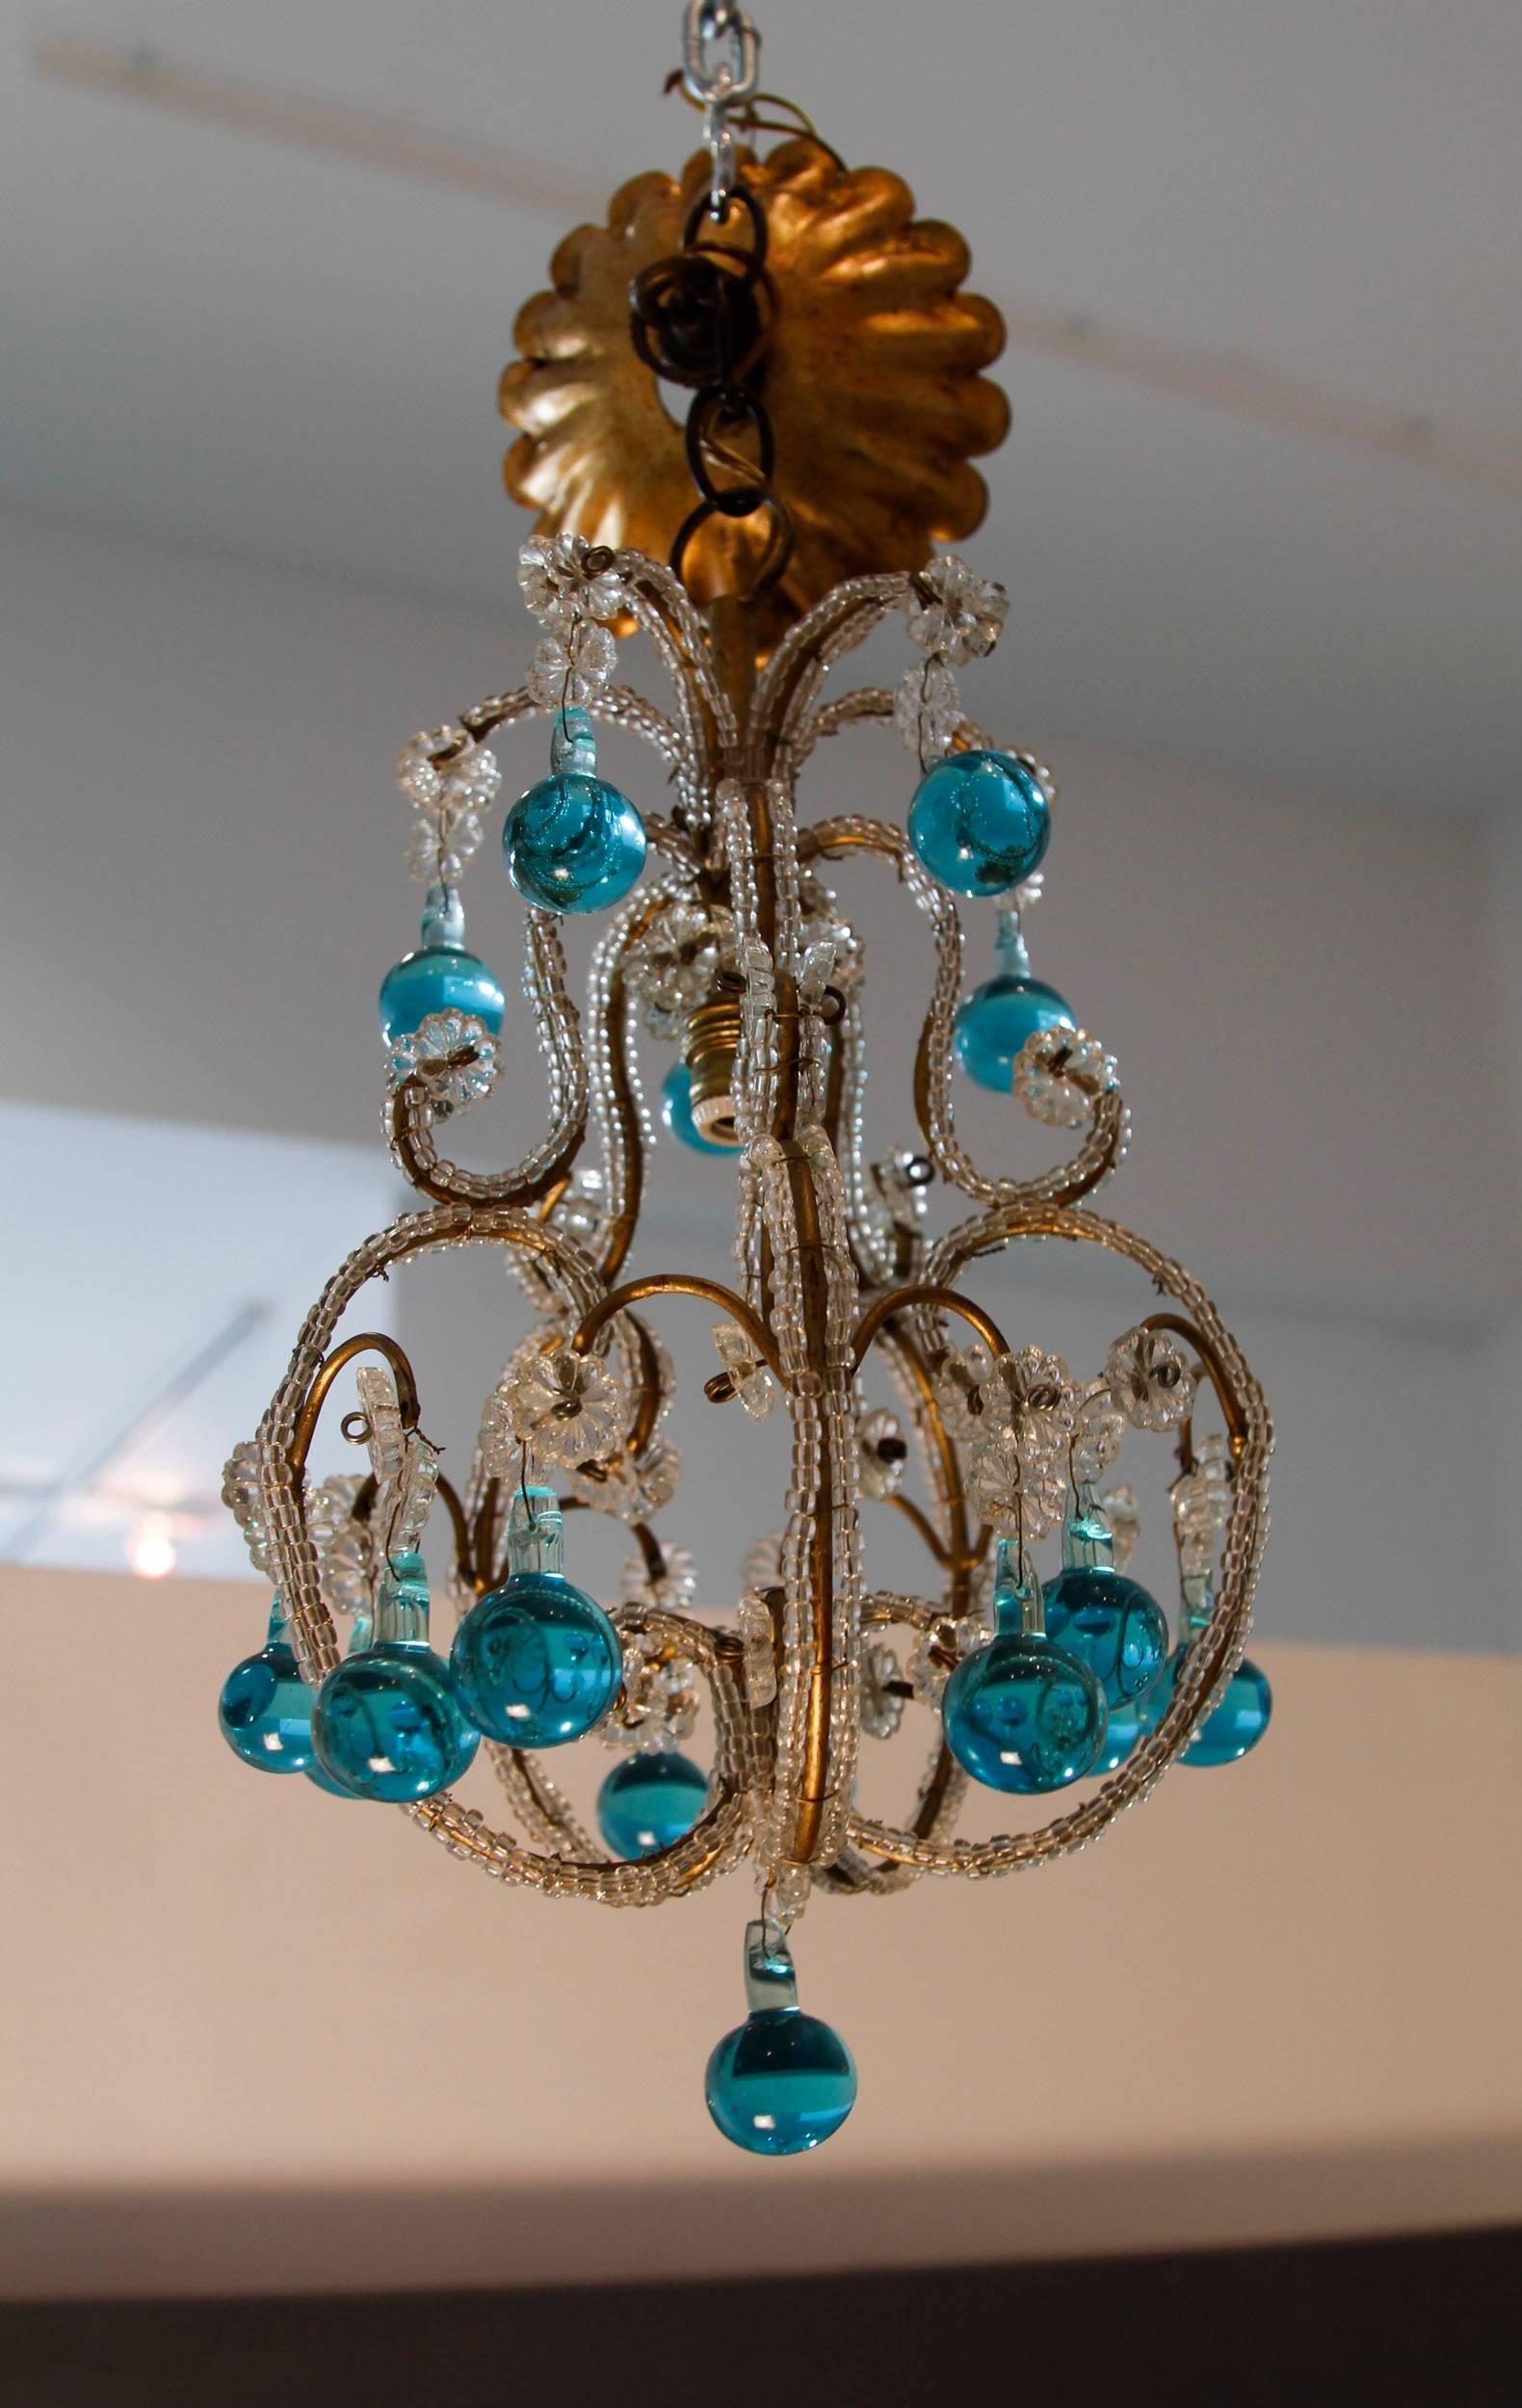 Pair of vintage turquoise blue Murano glass beaded chandeliers with tiny clear glass beads wrapping the cage armatures. We also have the co-ordinating sconces in the gallery.